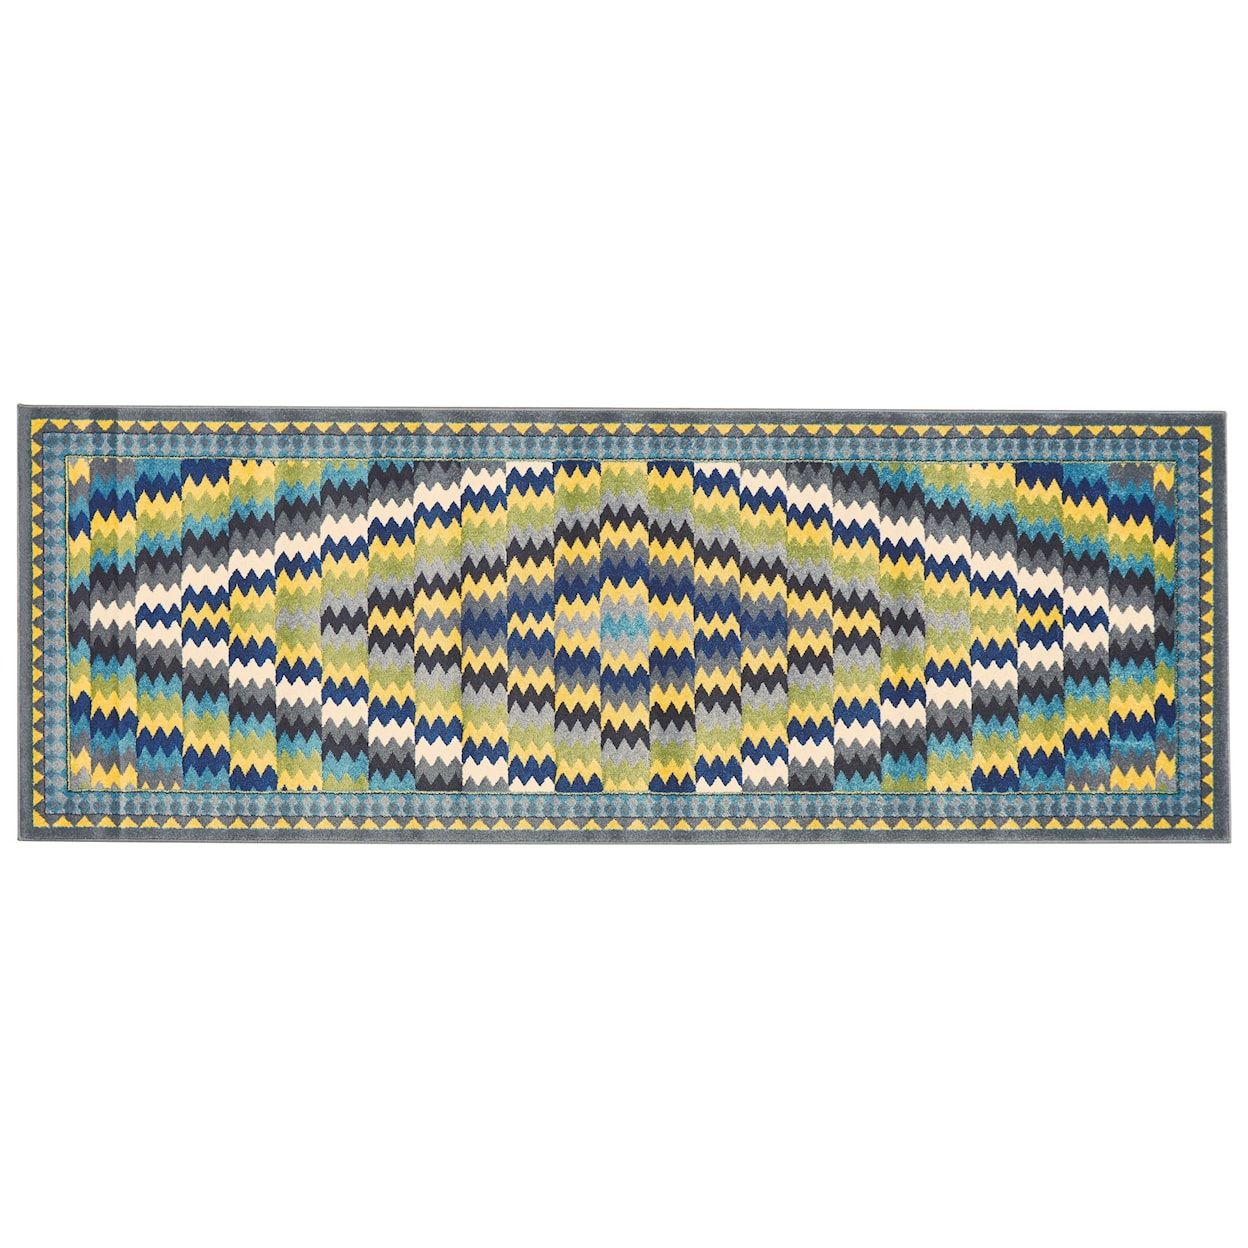 Feizy Rugs Brixton Ore 10' X 13'-2" Area Rug